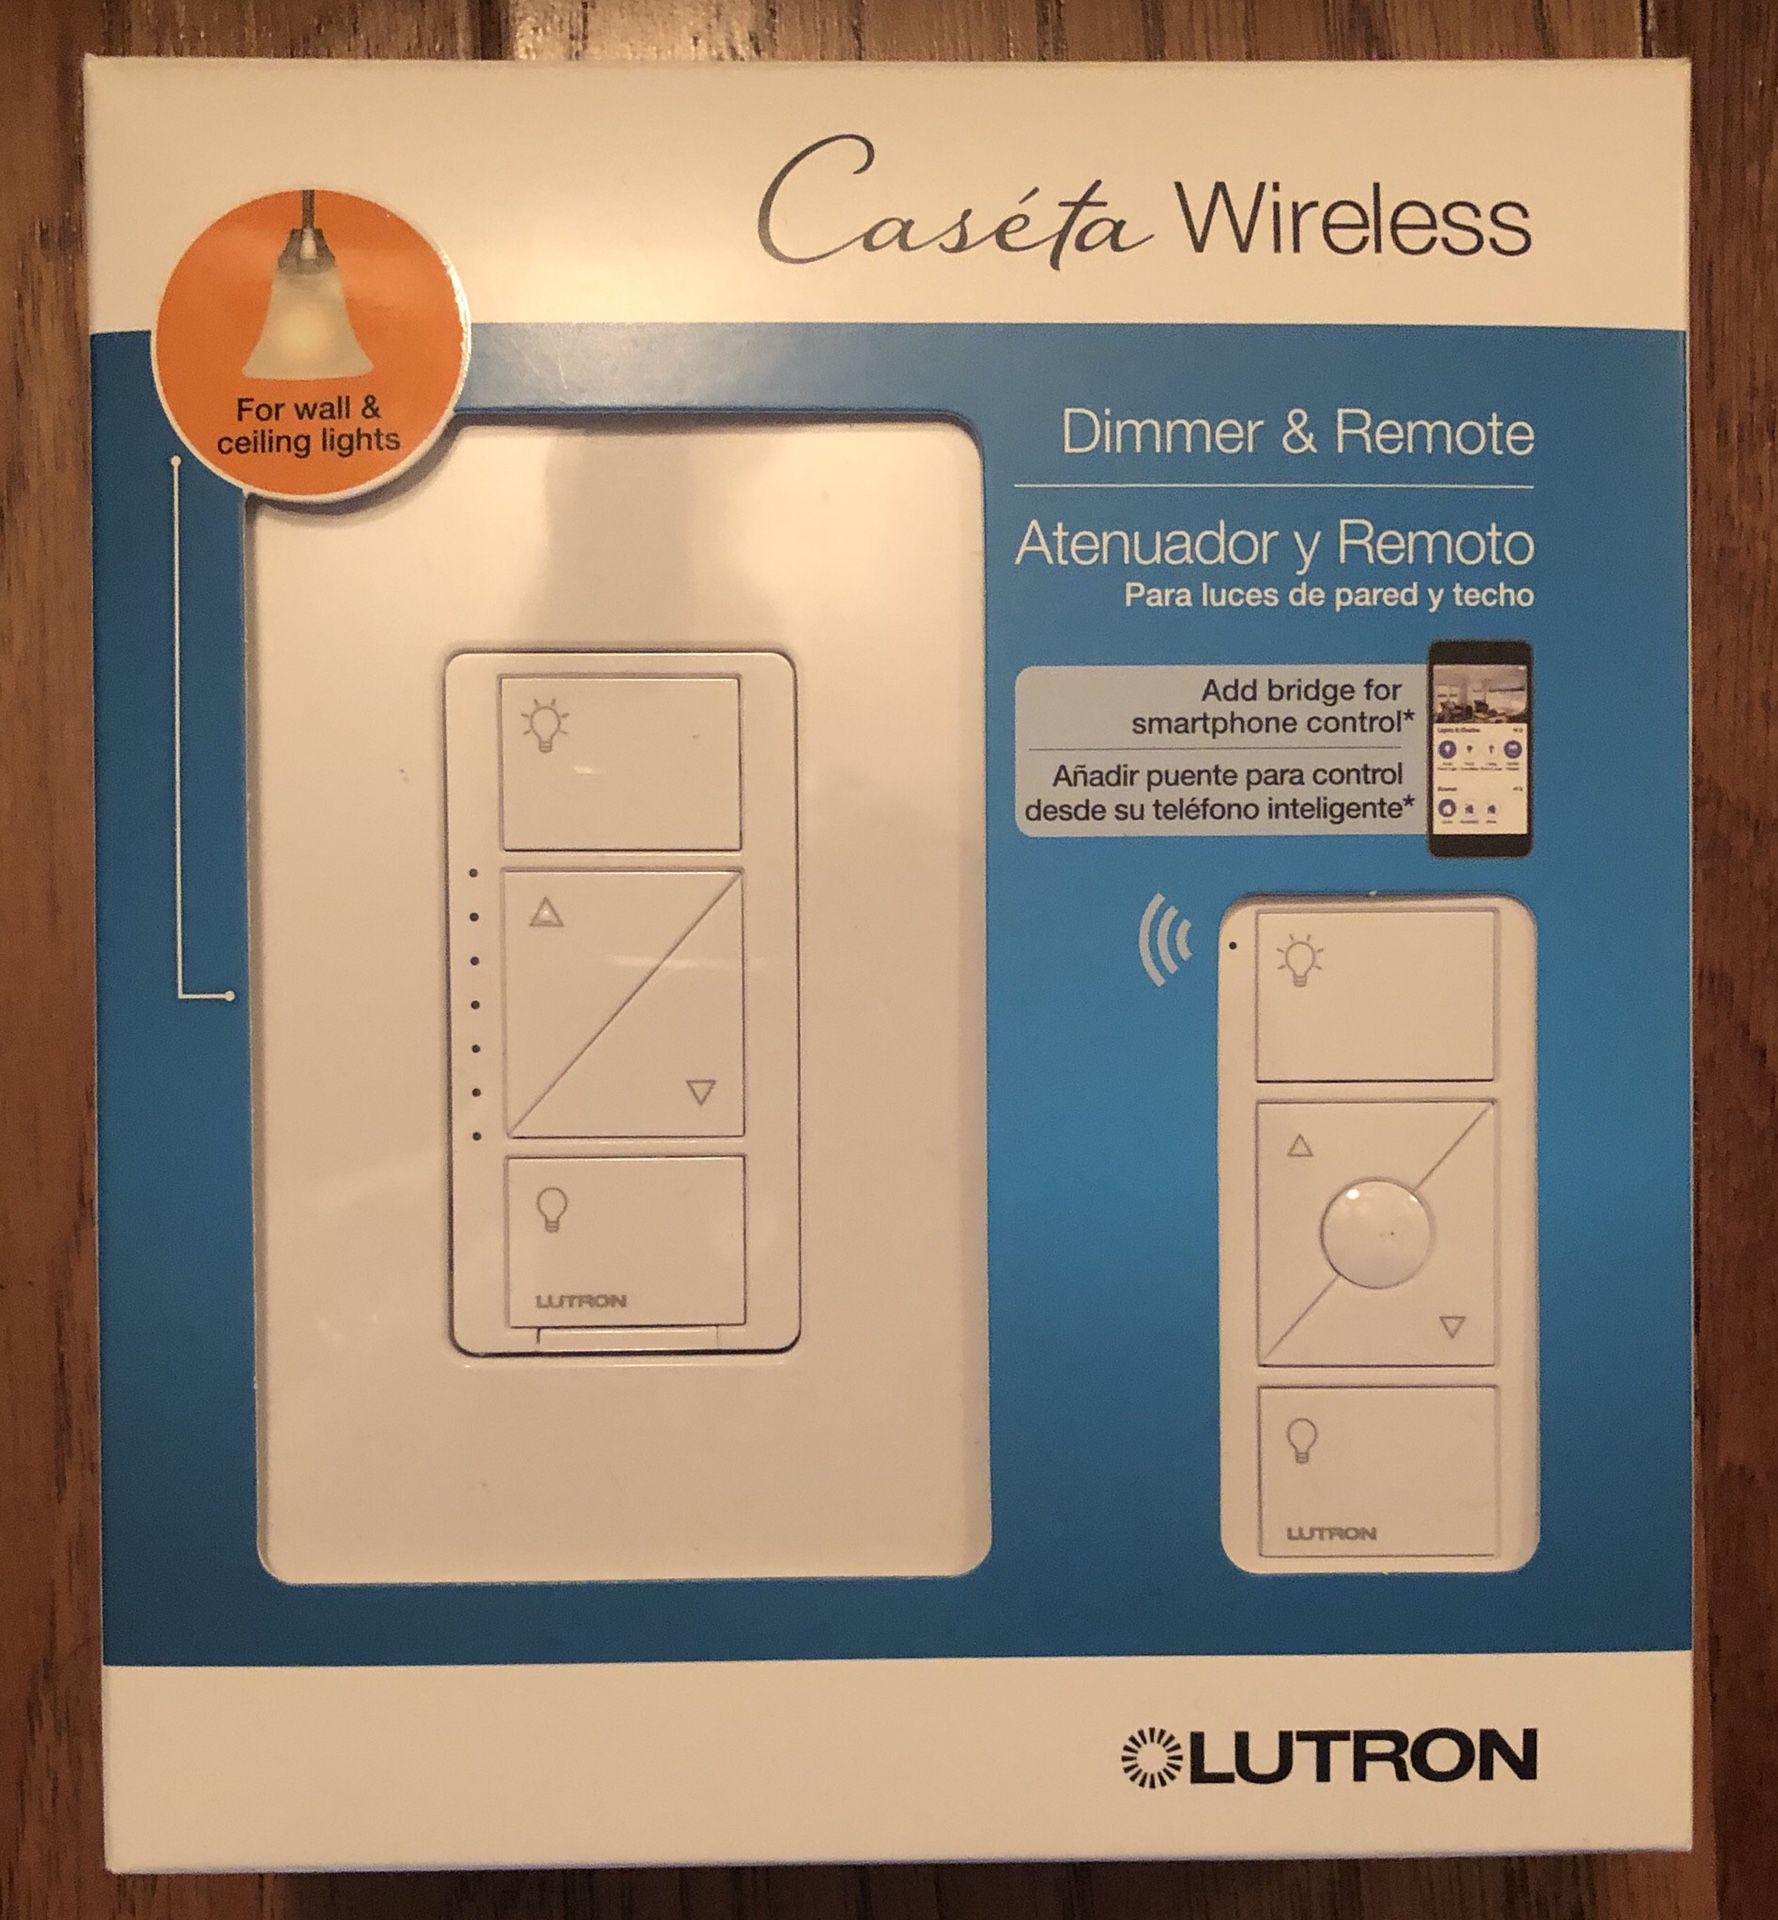 Lutron Caseta Wireless Dimmer & Remote For Wall And Ceiling Lights.